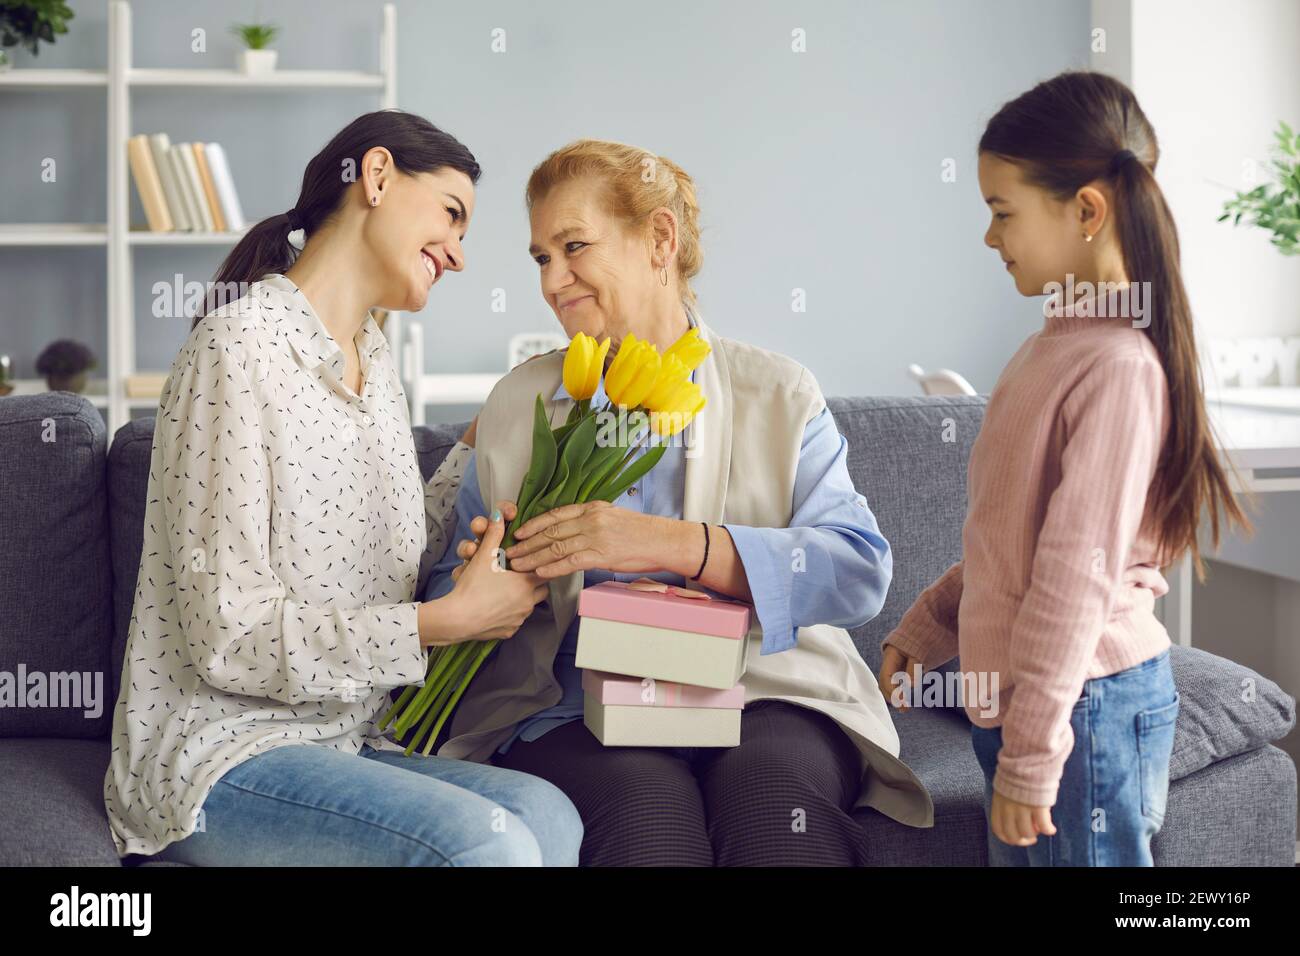 Happy older woman receives gifts in honor of Mother's Day or International Women's Day. Stock Photo